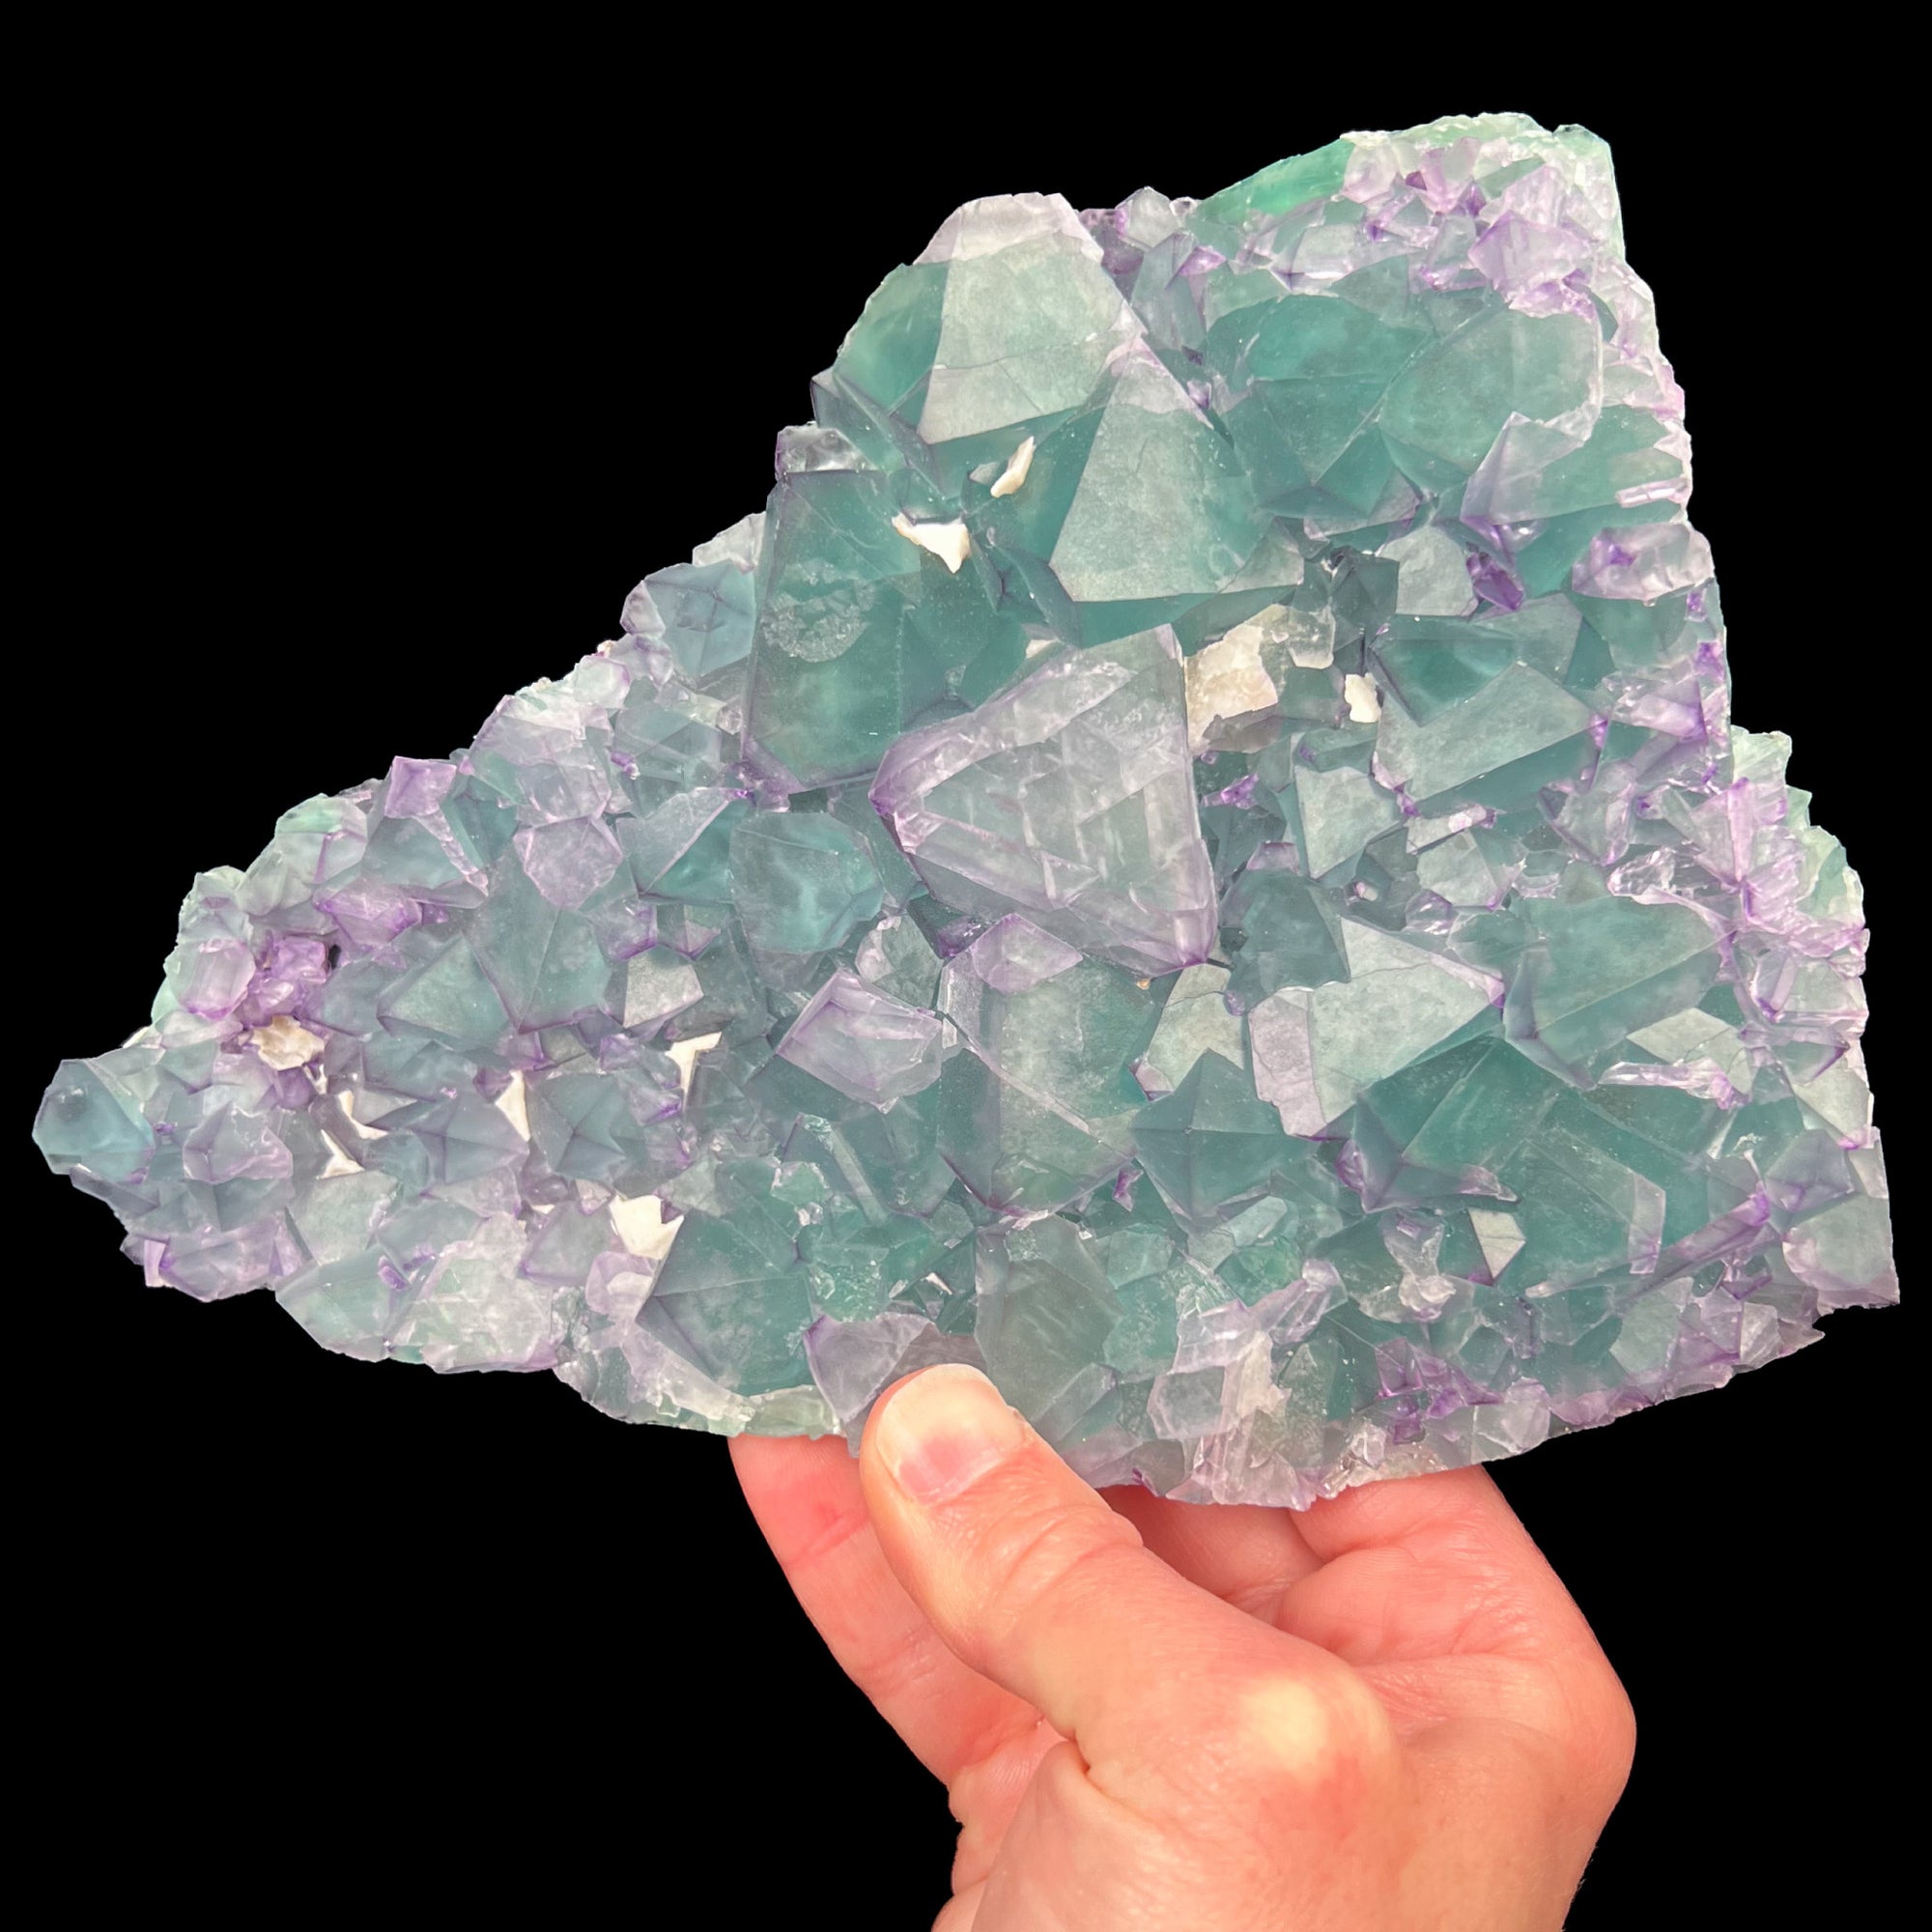 Large Purple and Green Fluorite Crystal Plate